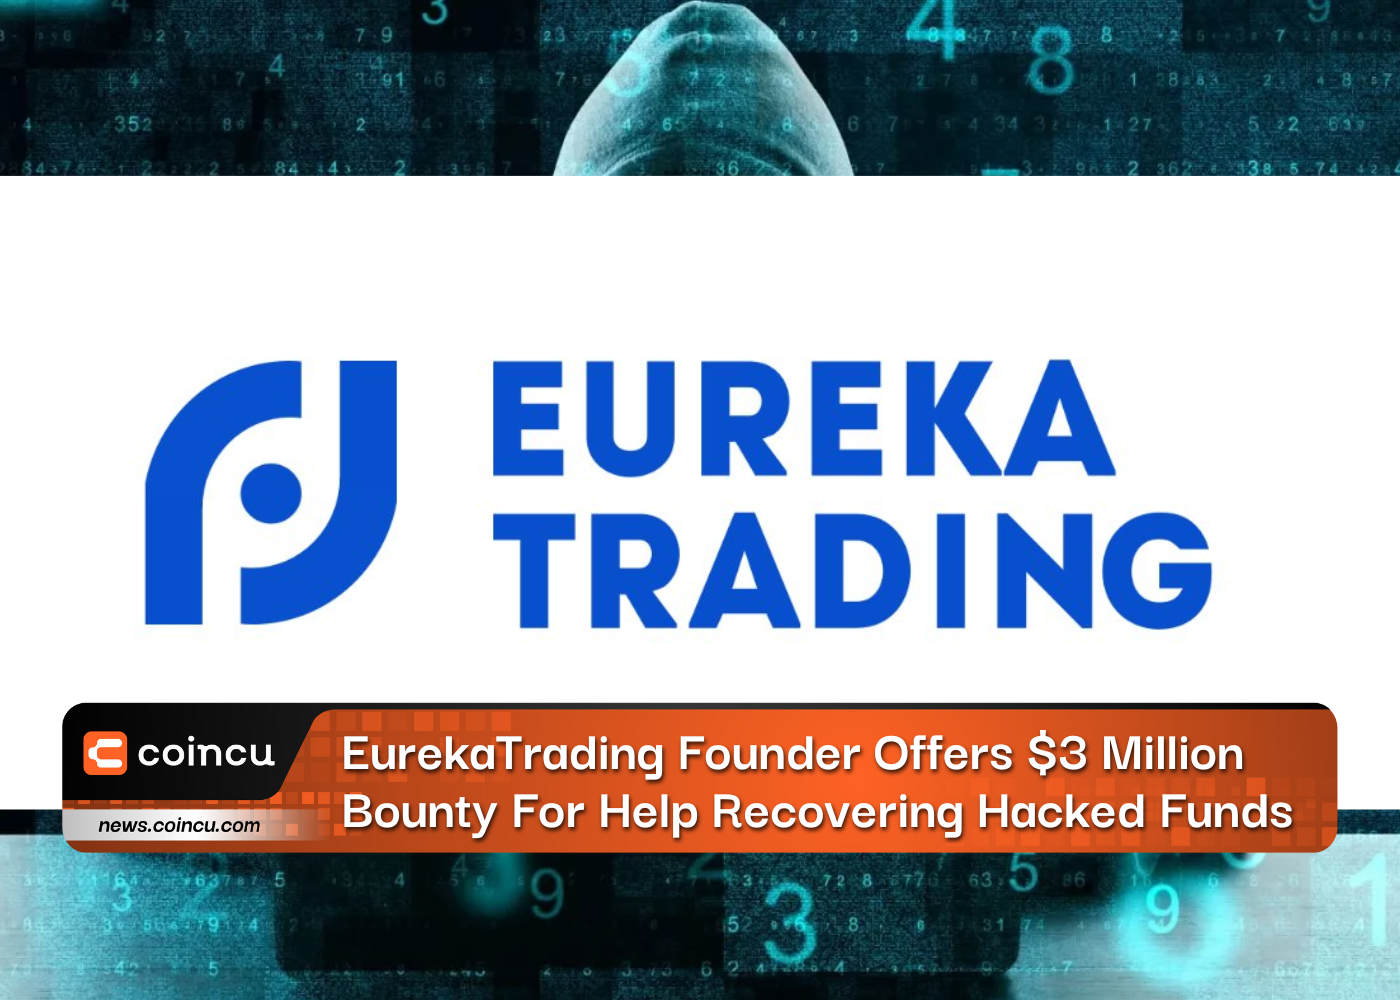 EurekaTrading Founder Offers $3 Million Bounty For Help Recovering Hacked Funds